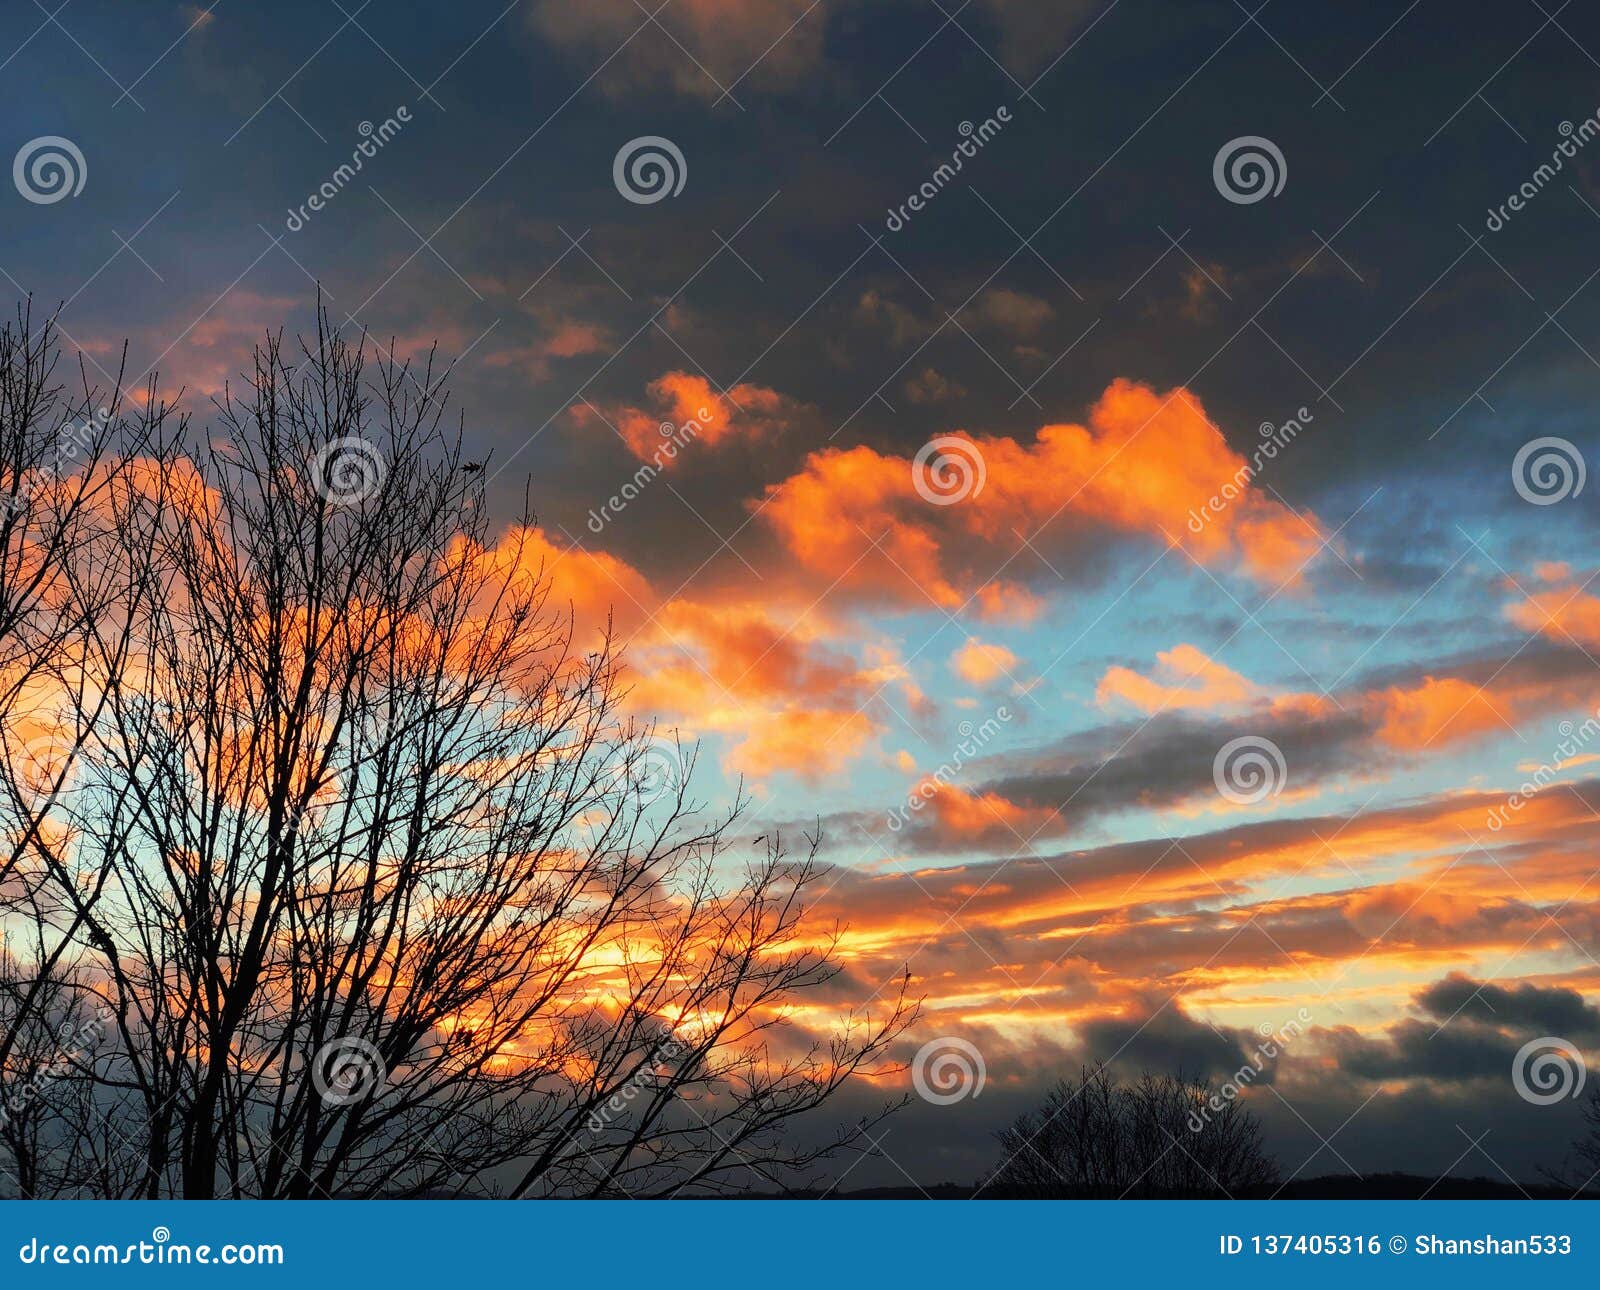 Beautiful and Colorful Sunset with Tree Branches Silhouette Stock Photo